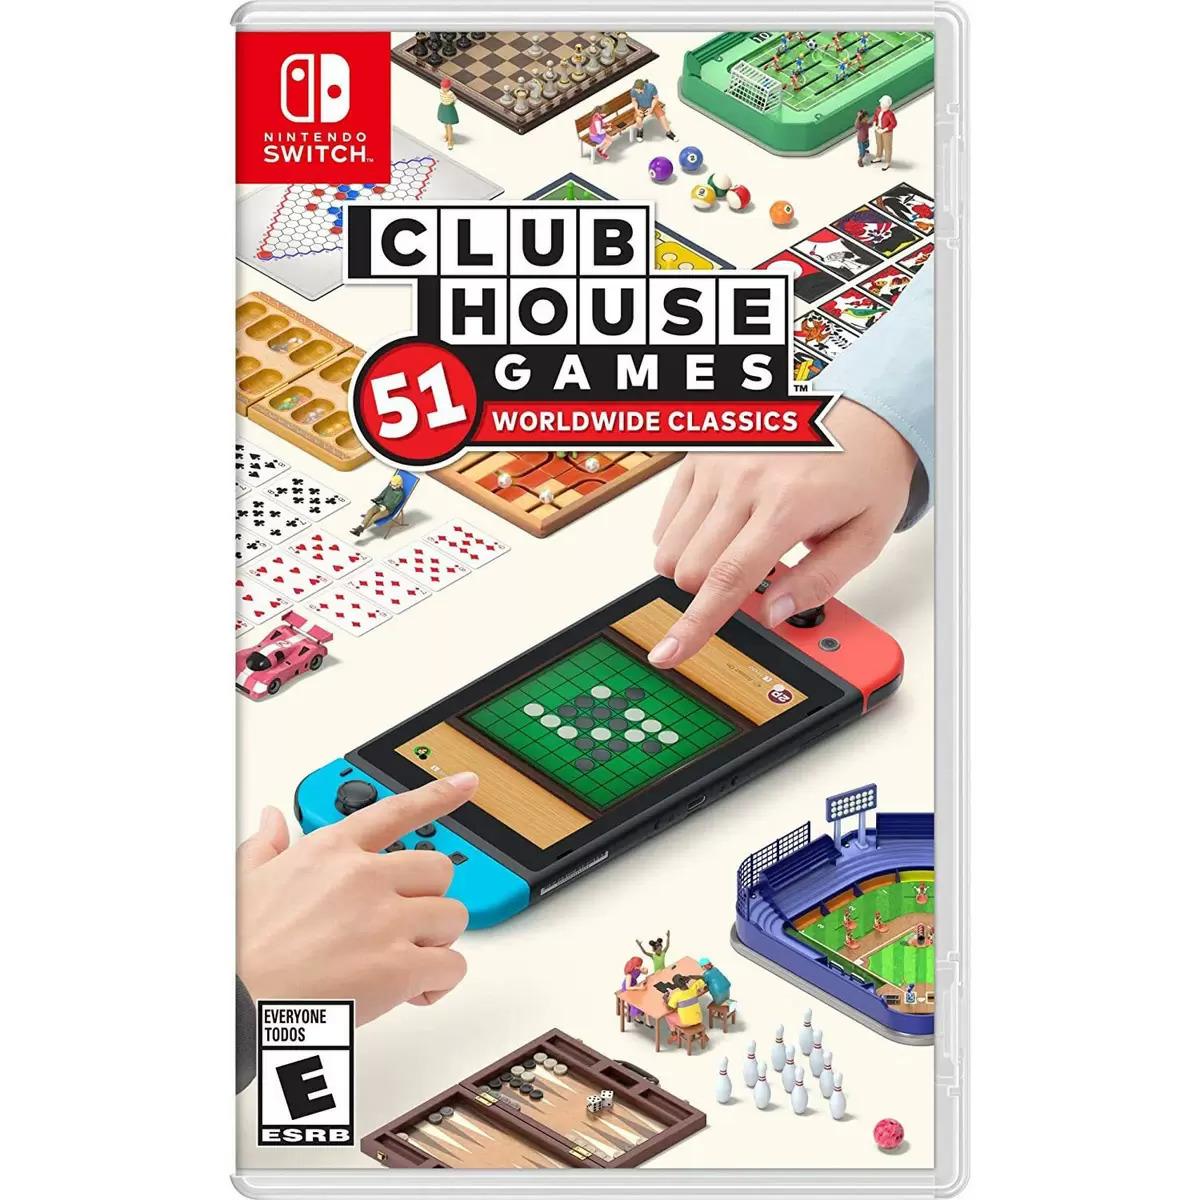 Clubhouse Games 51 Worldwide Classics Nintendo Switch for $29.99